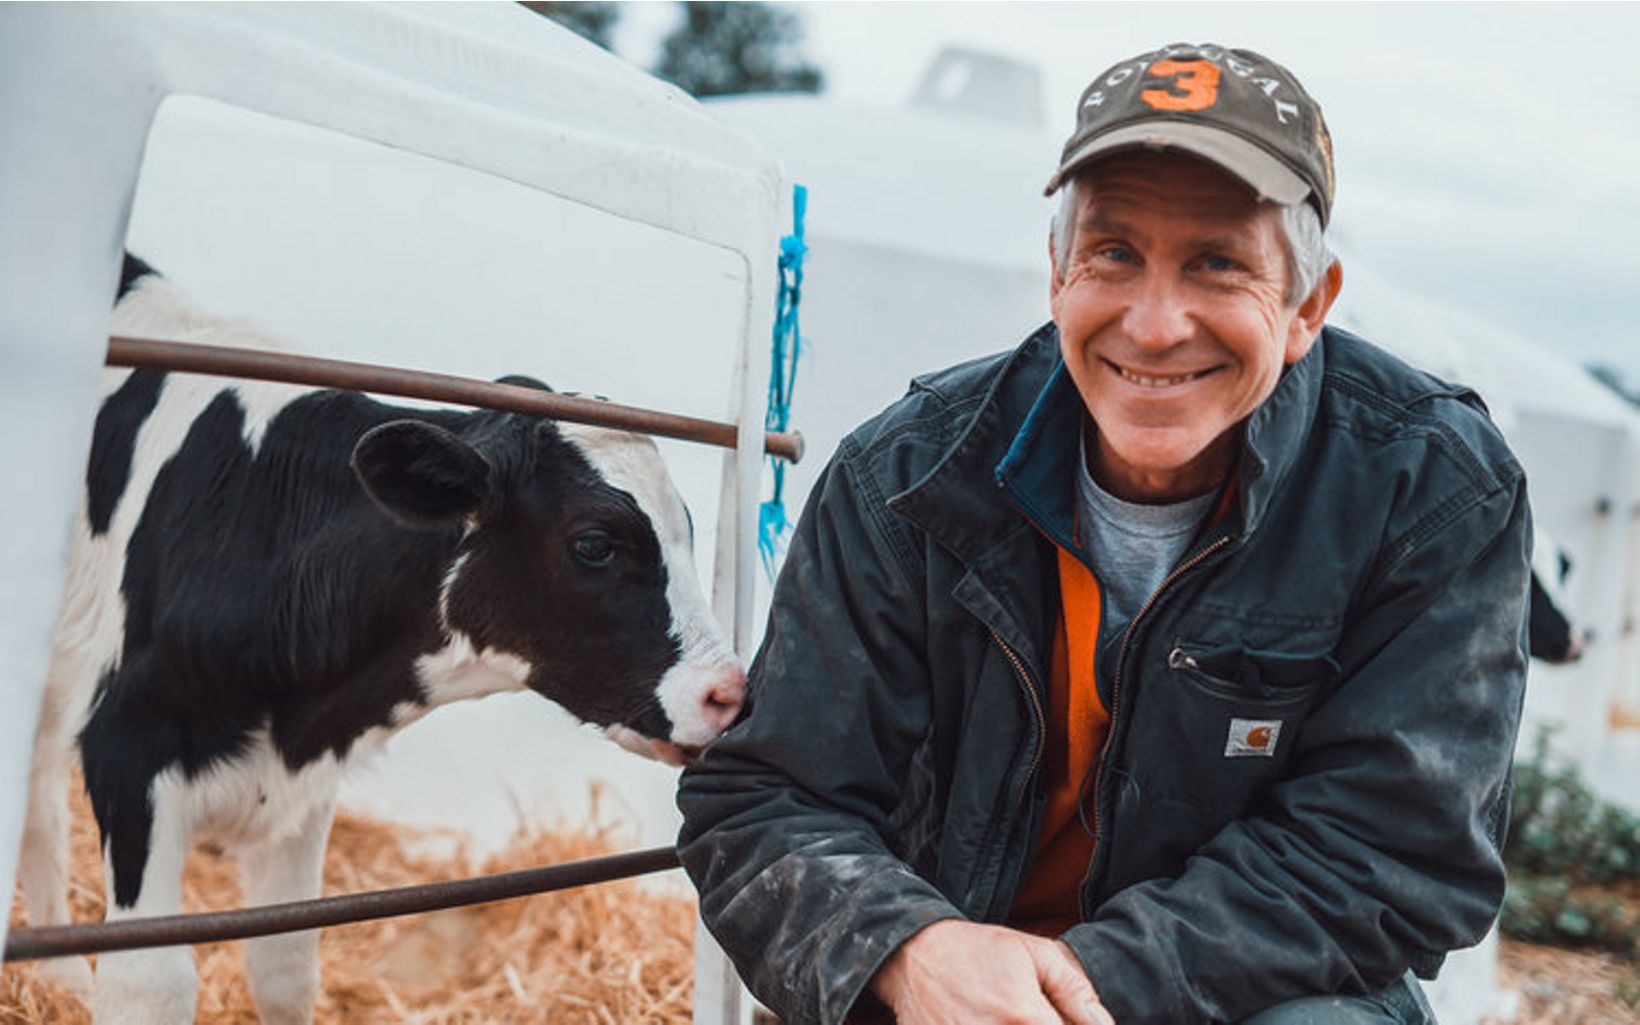 
                
                  LEGENDAIRY MAPLE VIEW FARM From nursing people to nursing cows, Ben Smith has done it all. See how he runs his 400 dairy cow operation with a warm smile and passion for environmental stewardship.
                  © Courtney Baxter/TNC
                
              